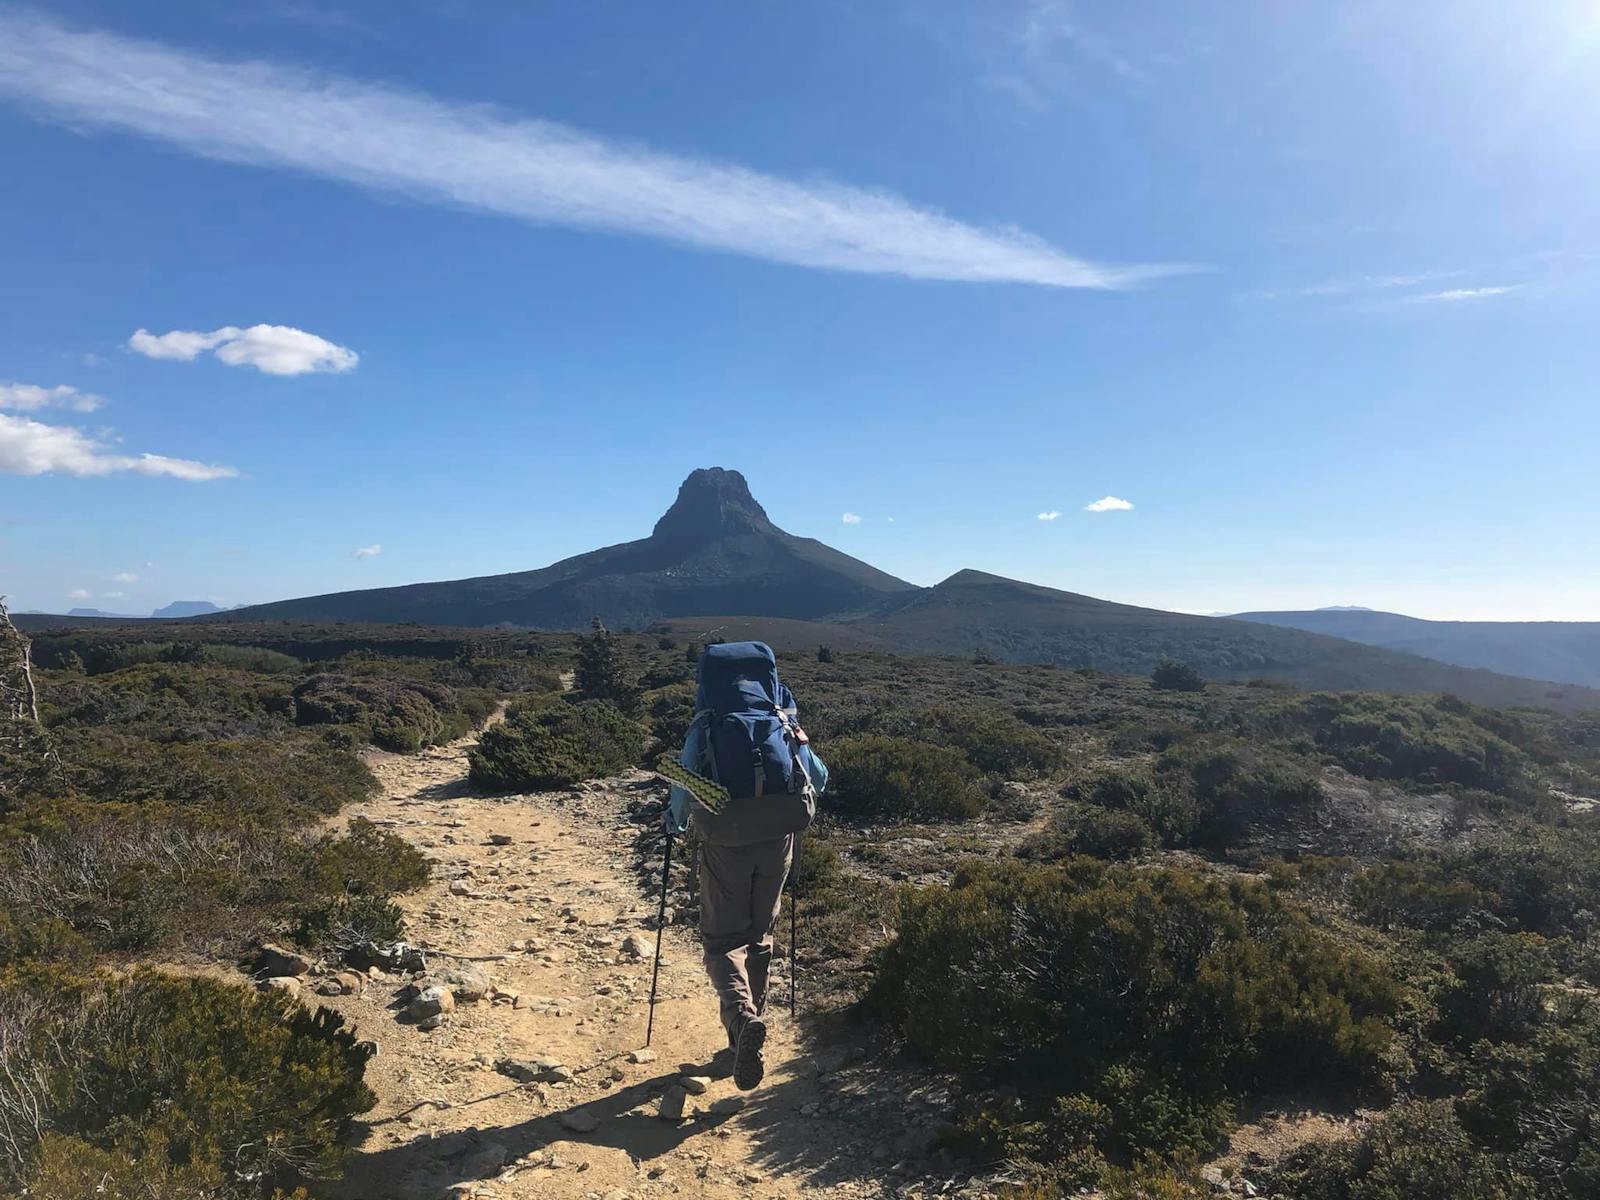 Hiking pack for hire